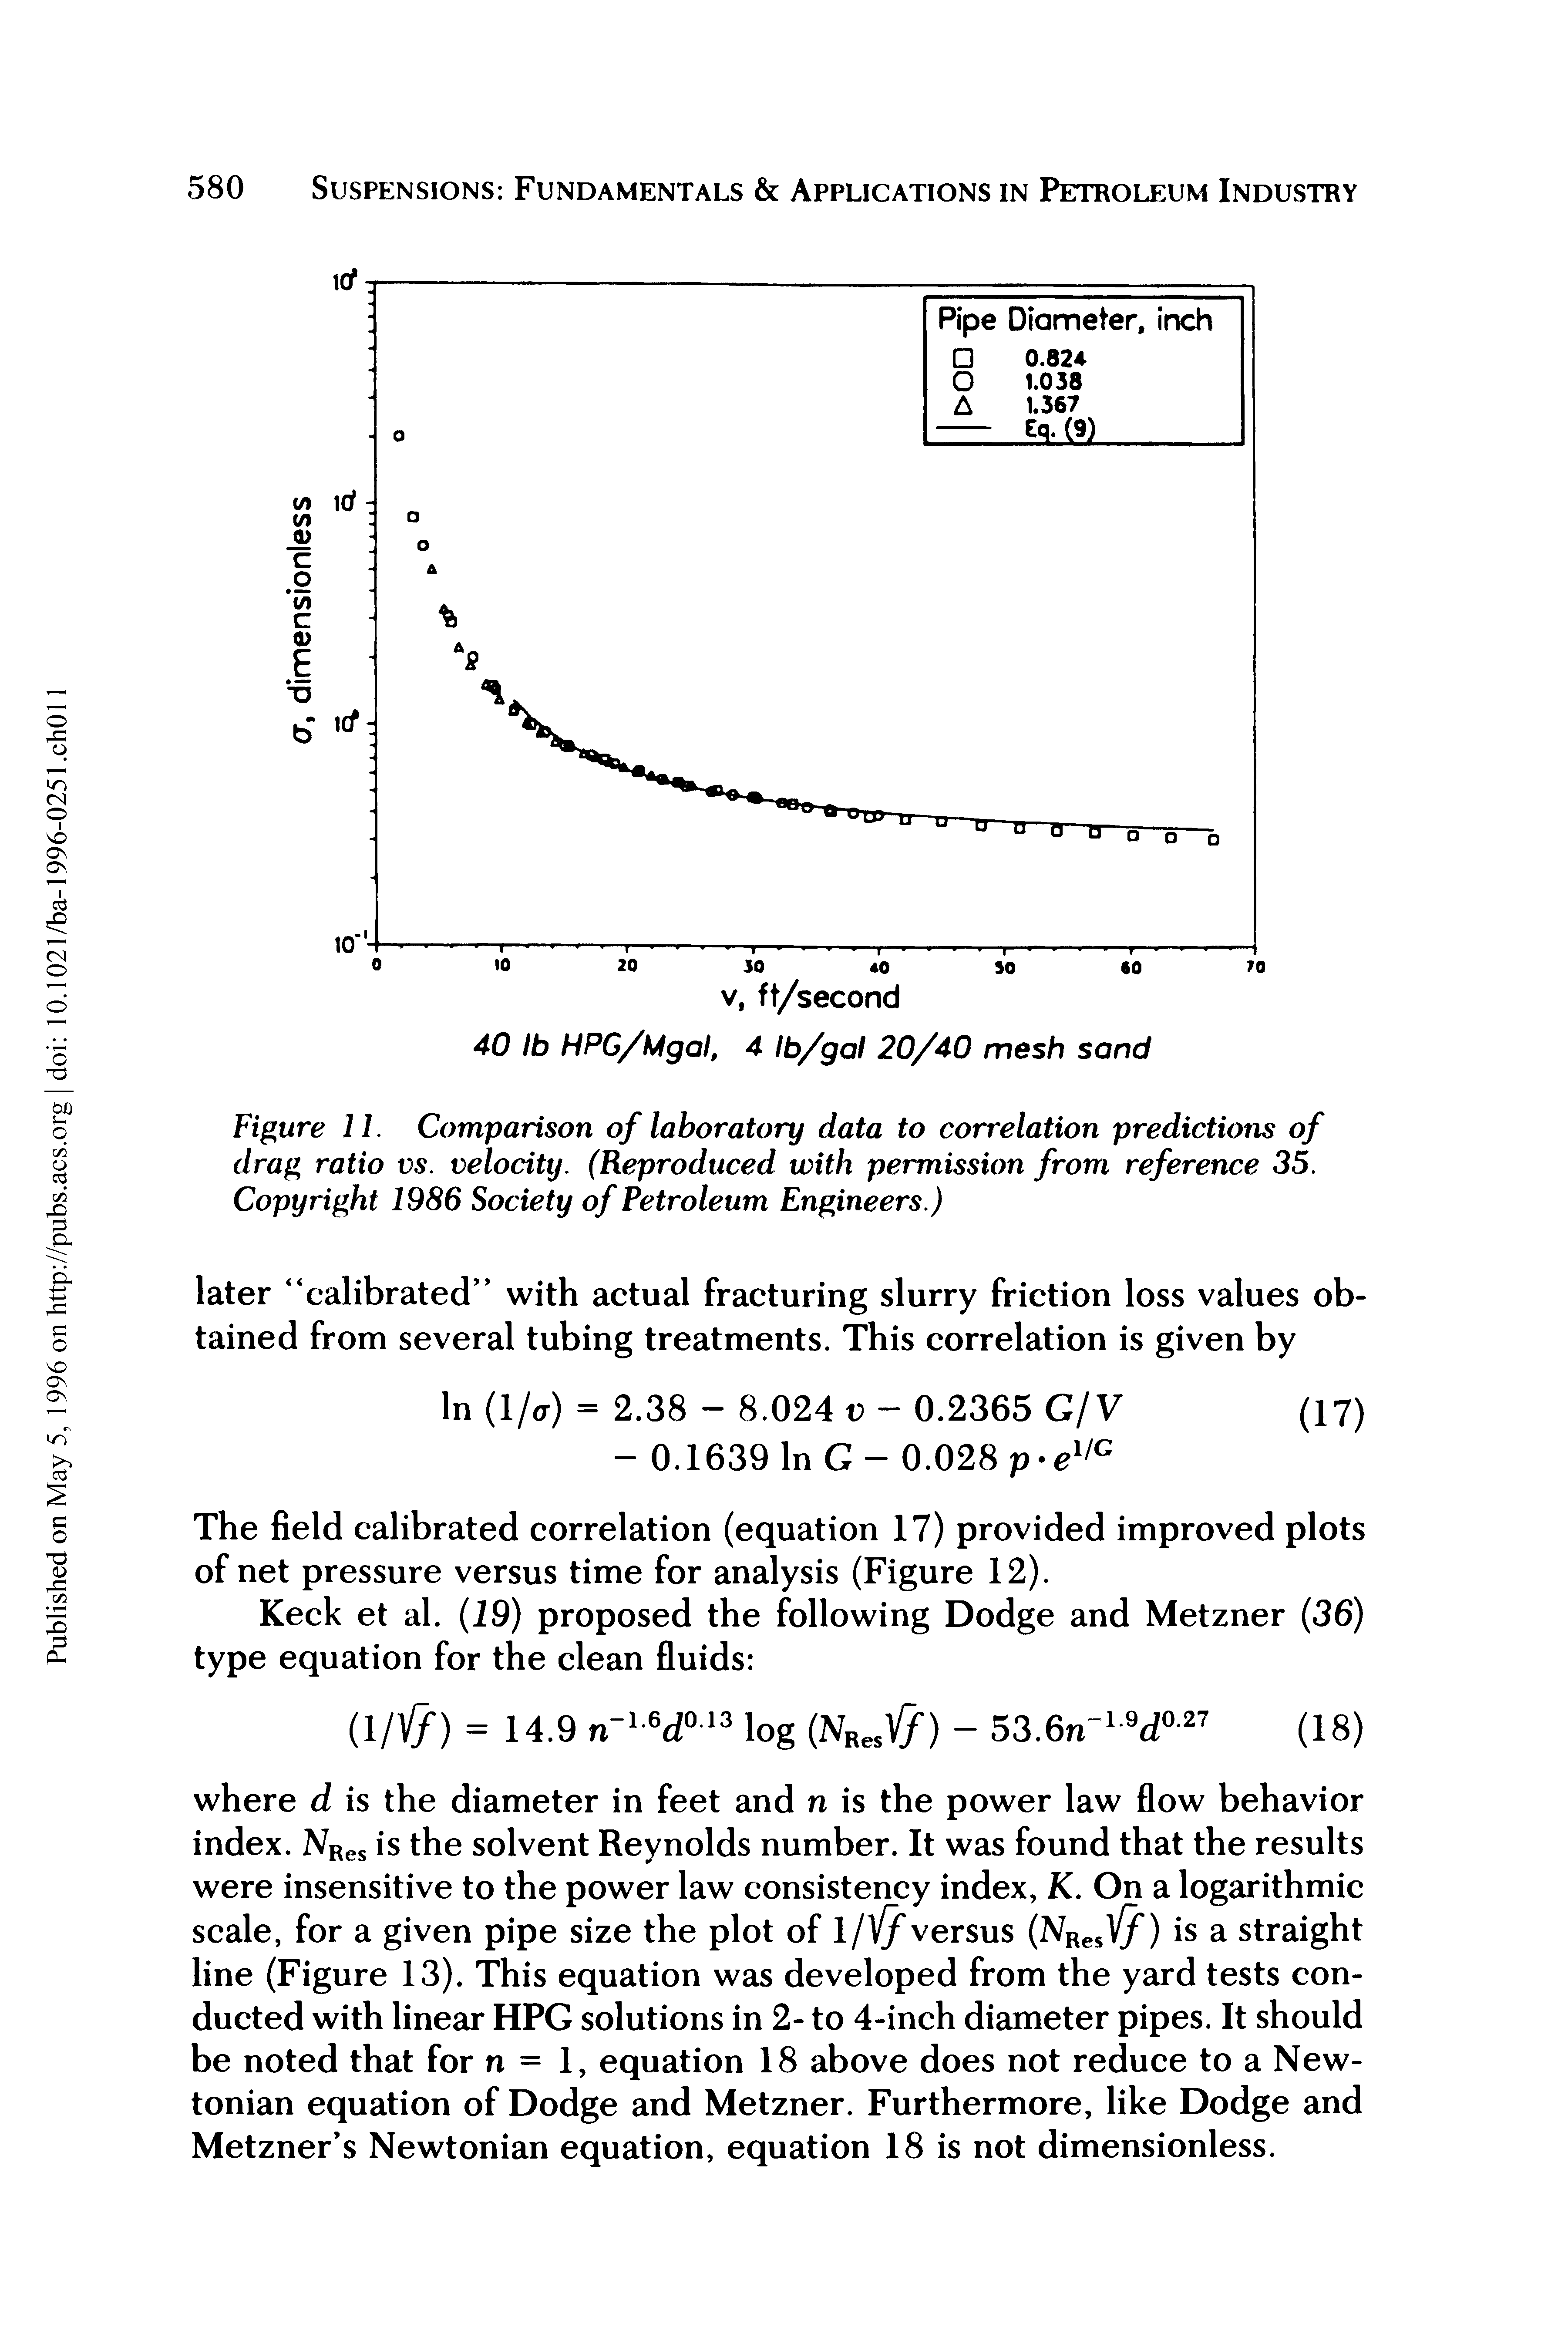 Figure 11. Comparison of laboratory data to correlation predictions of drag ratio vs. velocity. (Reproduced with permission from reference 35. Copyright 1986 Society of Petroleum Engineers.)...